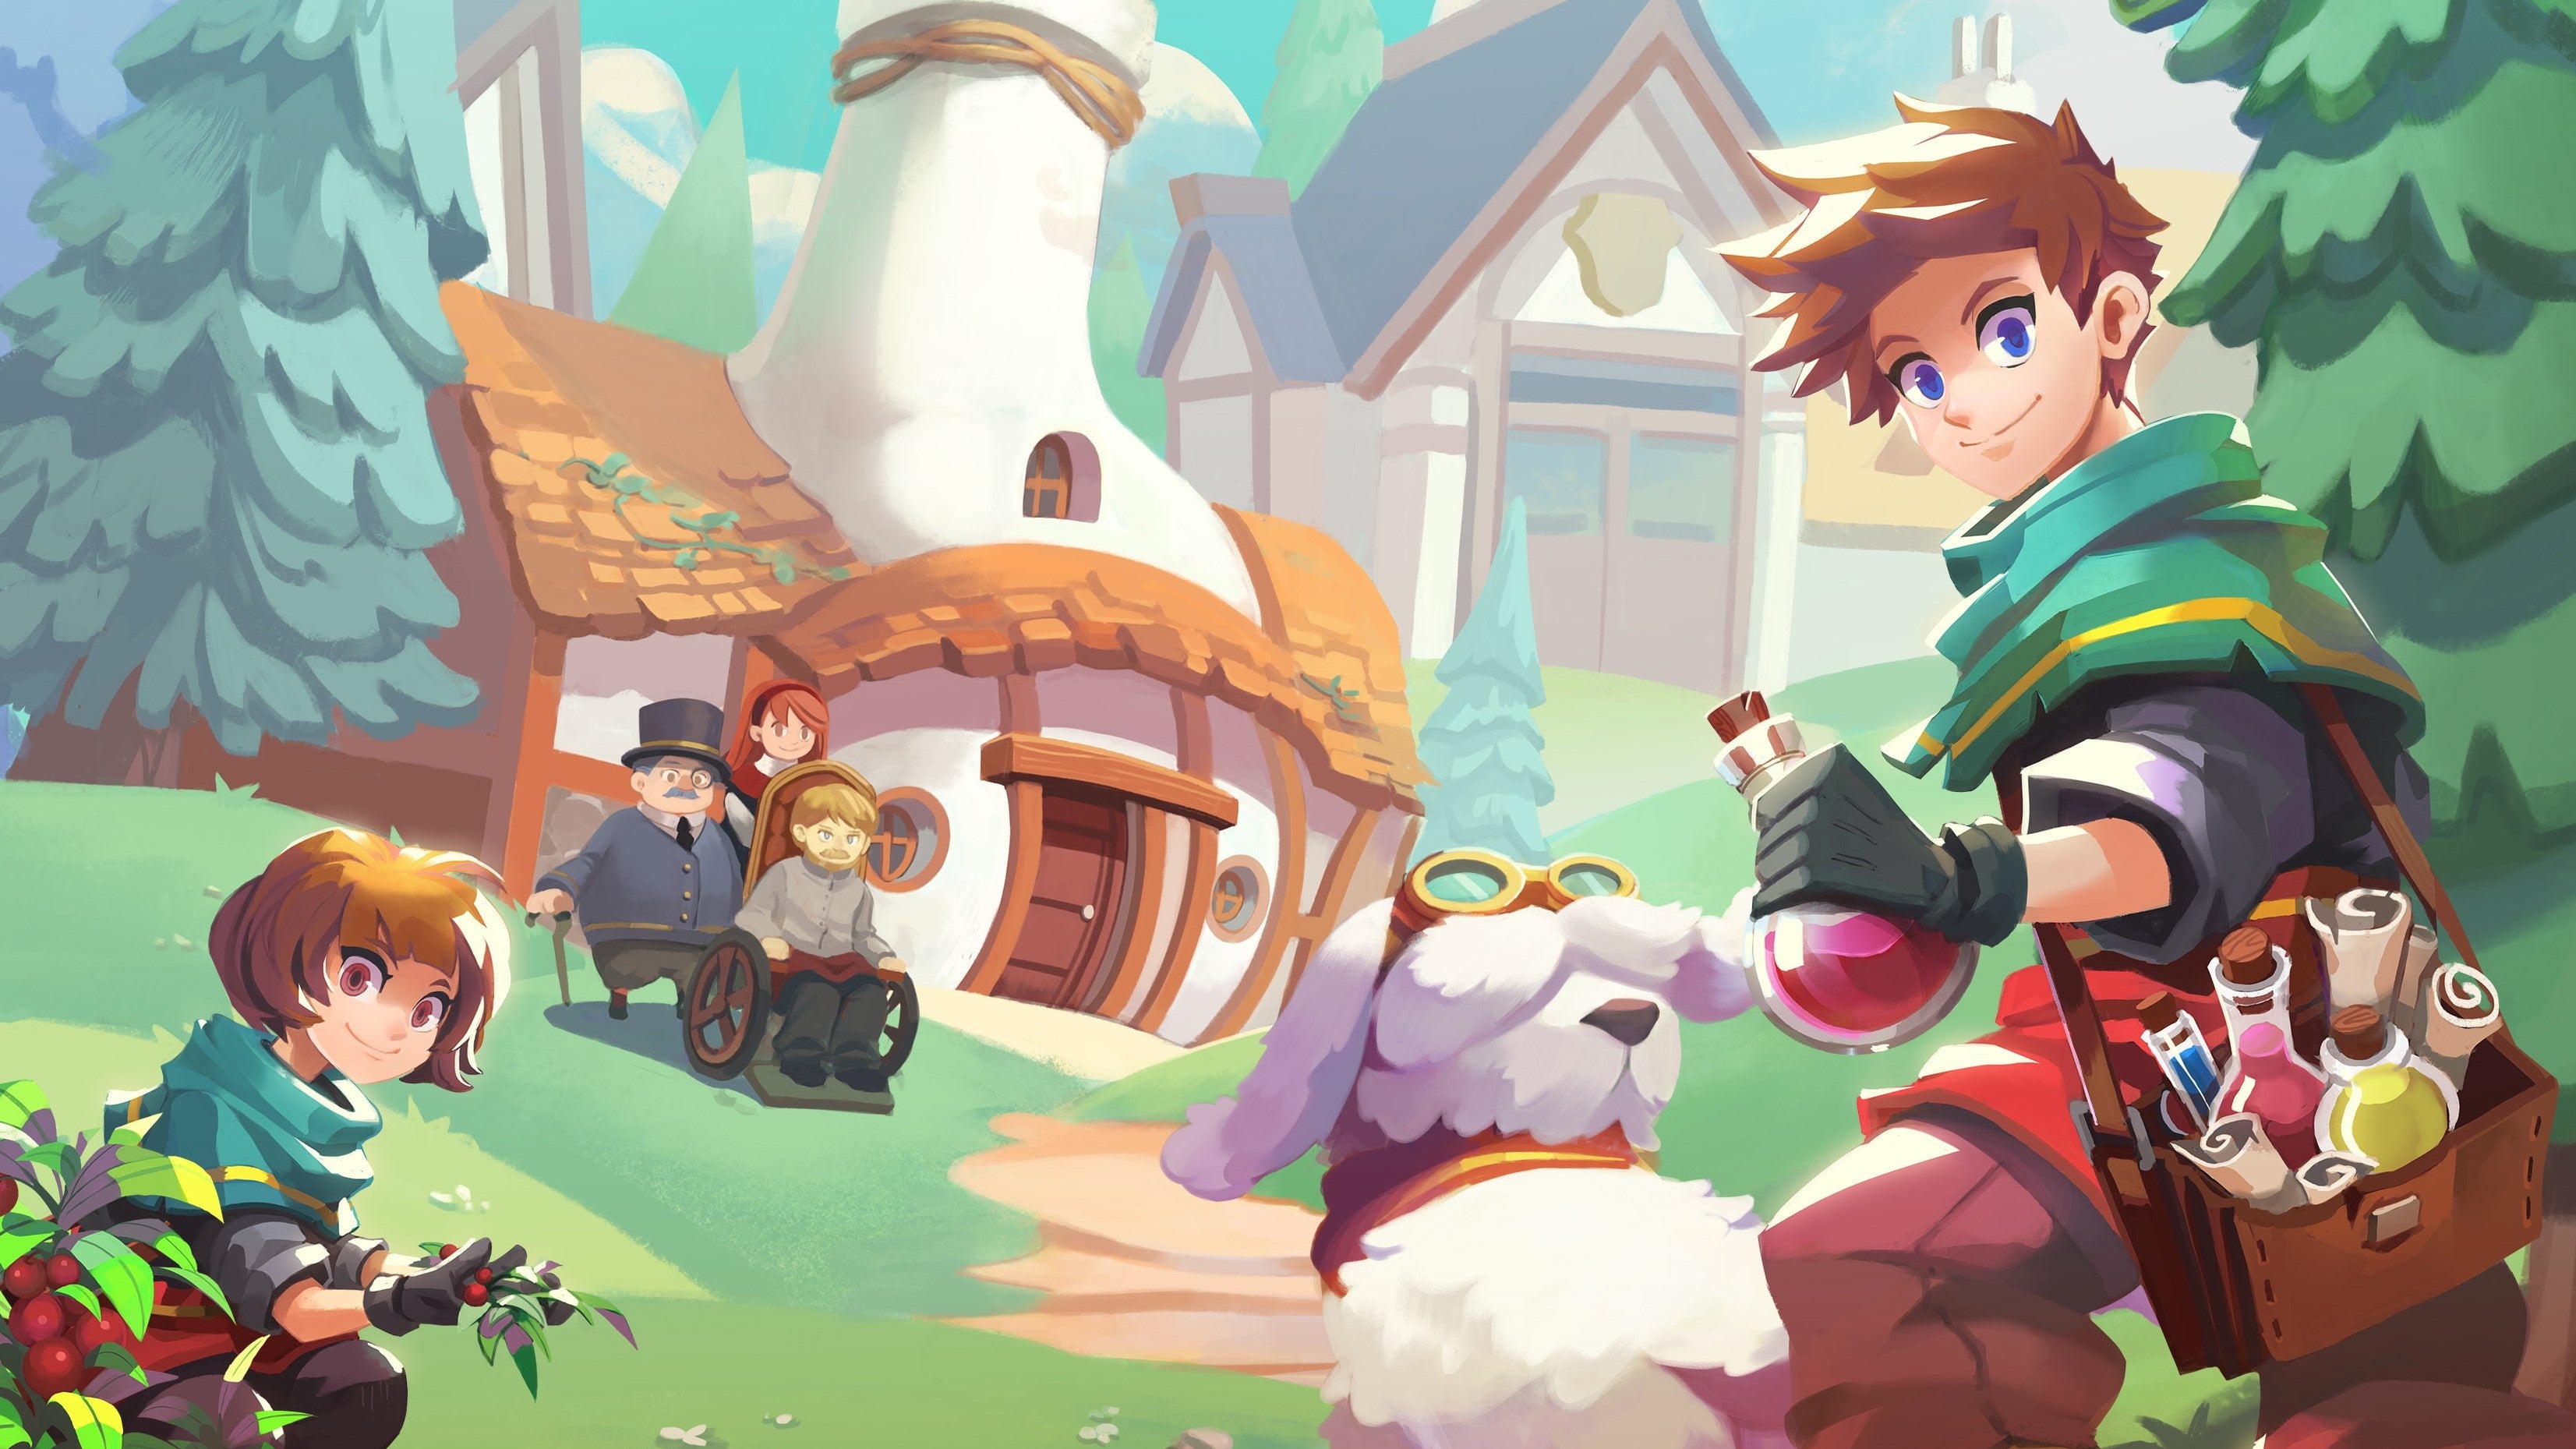 A bright and cartoony image, of a spiky haired young character looking at the camera, with a fluffy white dog beside them. The character holds a potion bottle and has a bag full of scrolls and other goodies. In the background is a white house shaped a bit like a bottle. It is the characters' house and laboratory.